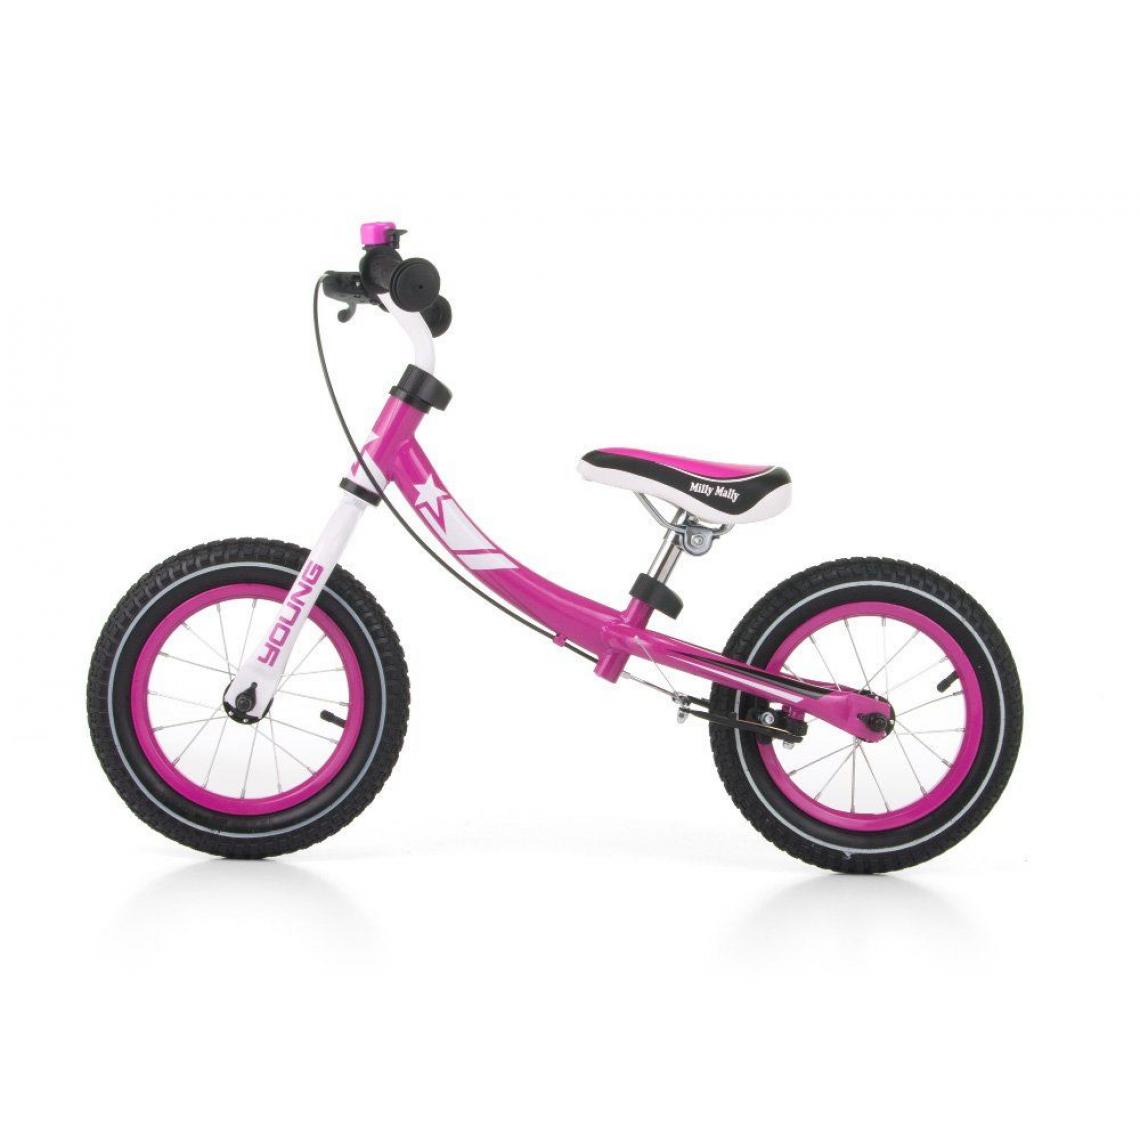 Milly Mally - Draisienne Young - couleur rose - Tricycle